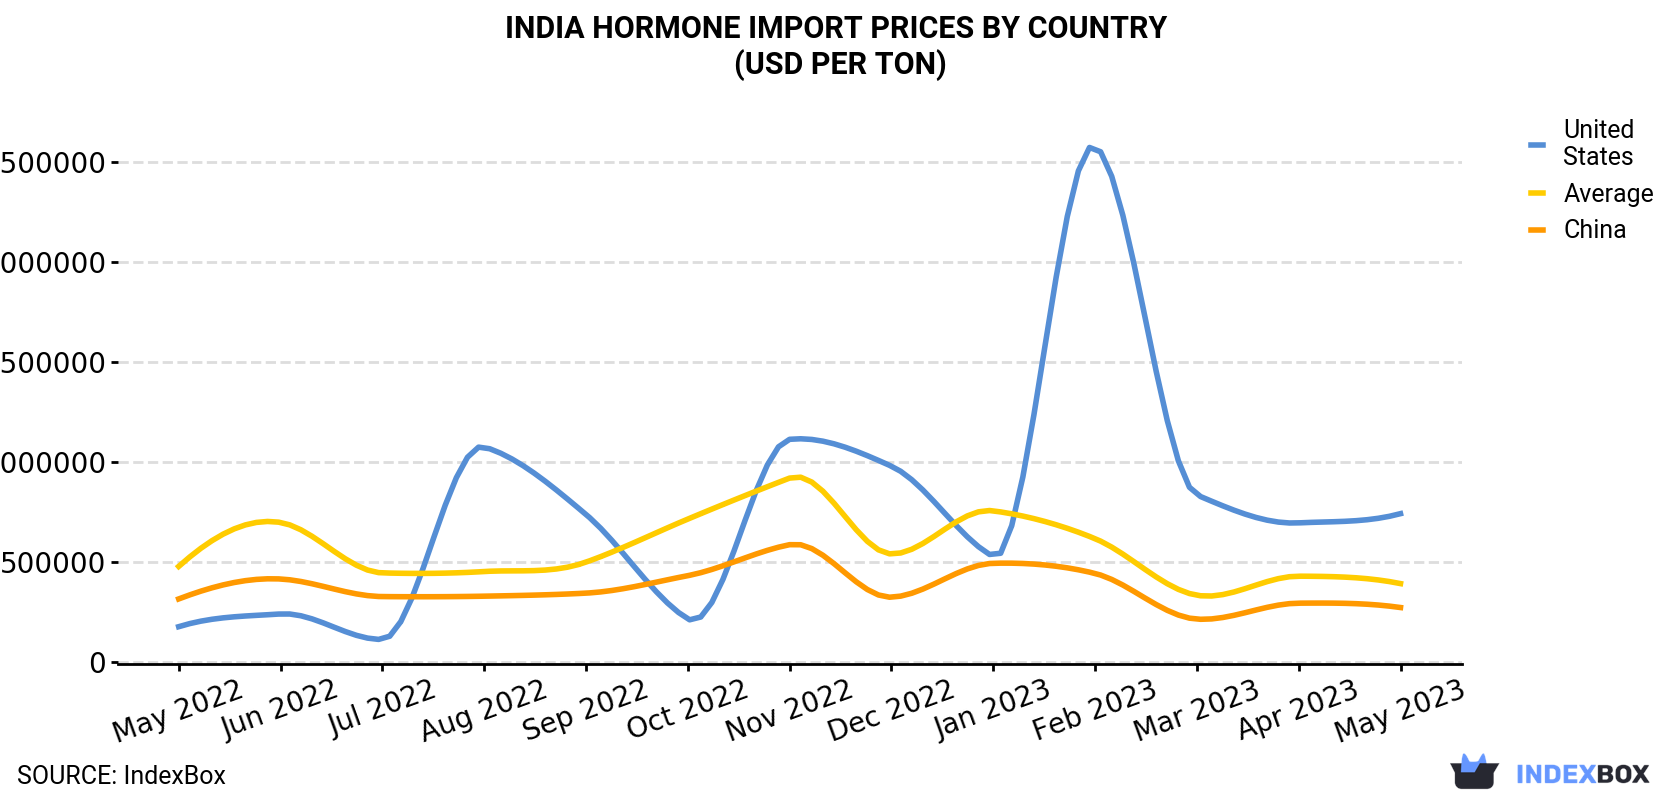 India Hormone Import Prices By Country (USD Per Ton)